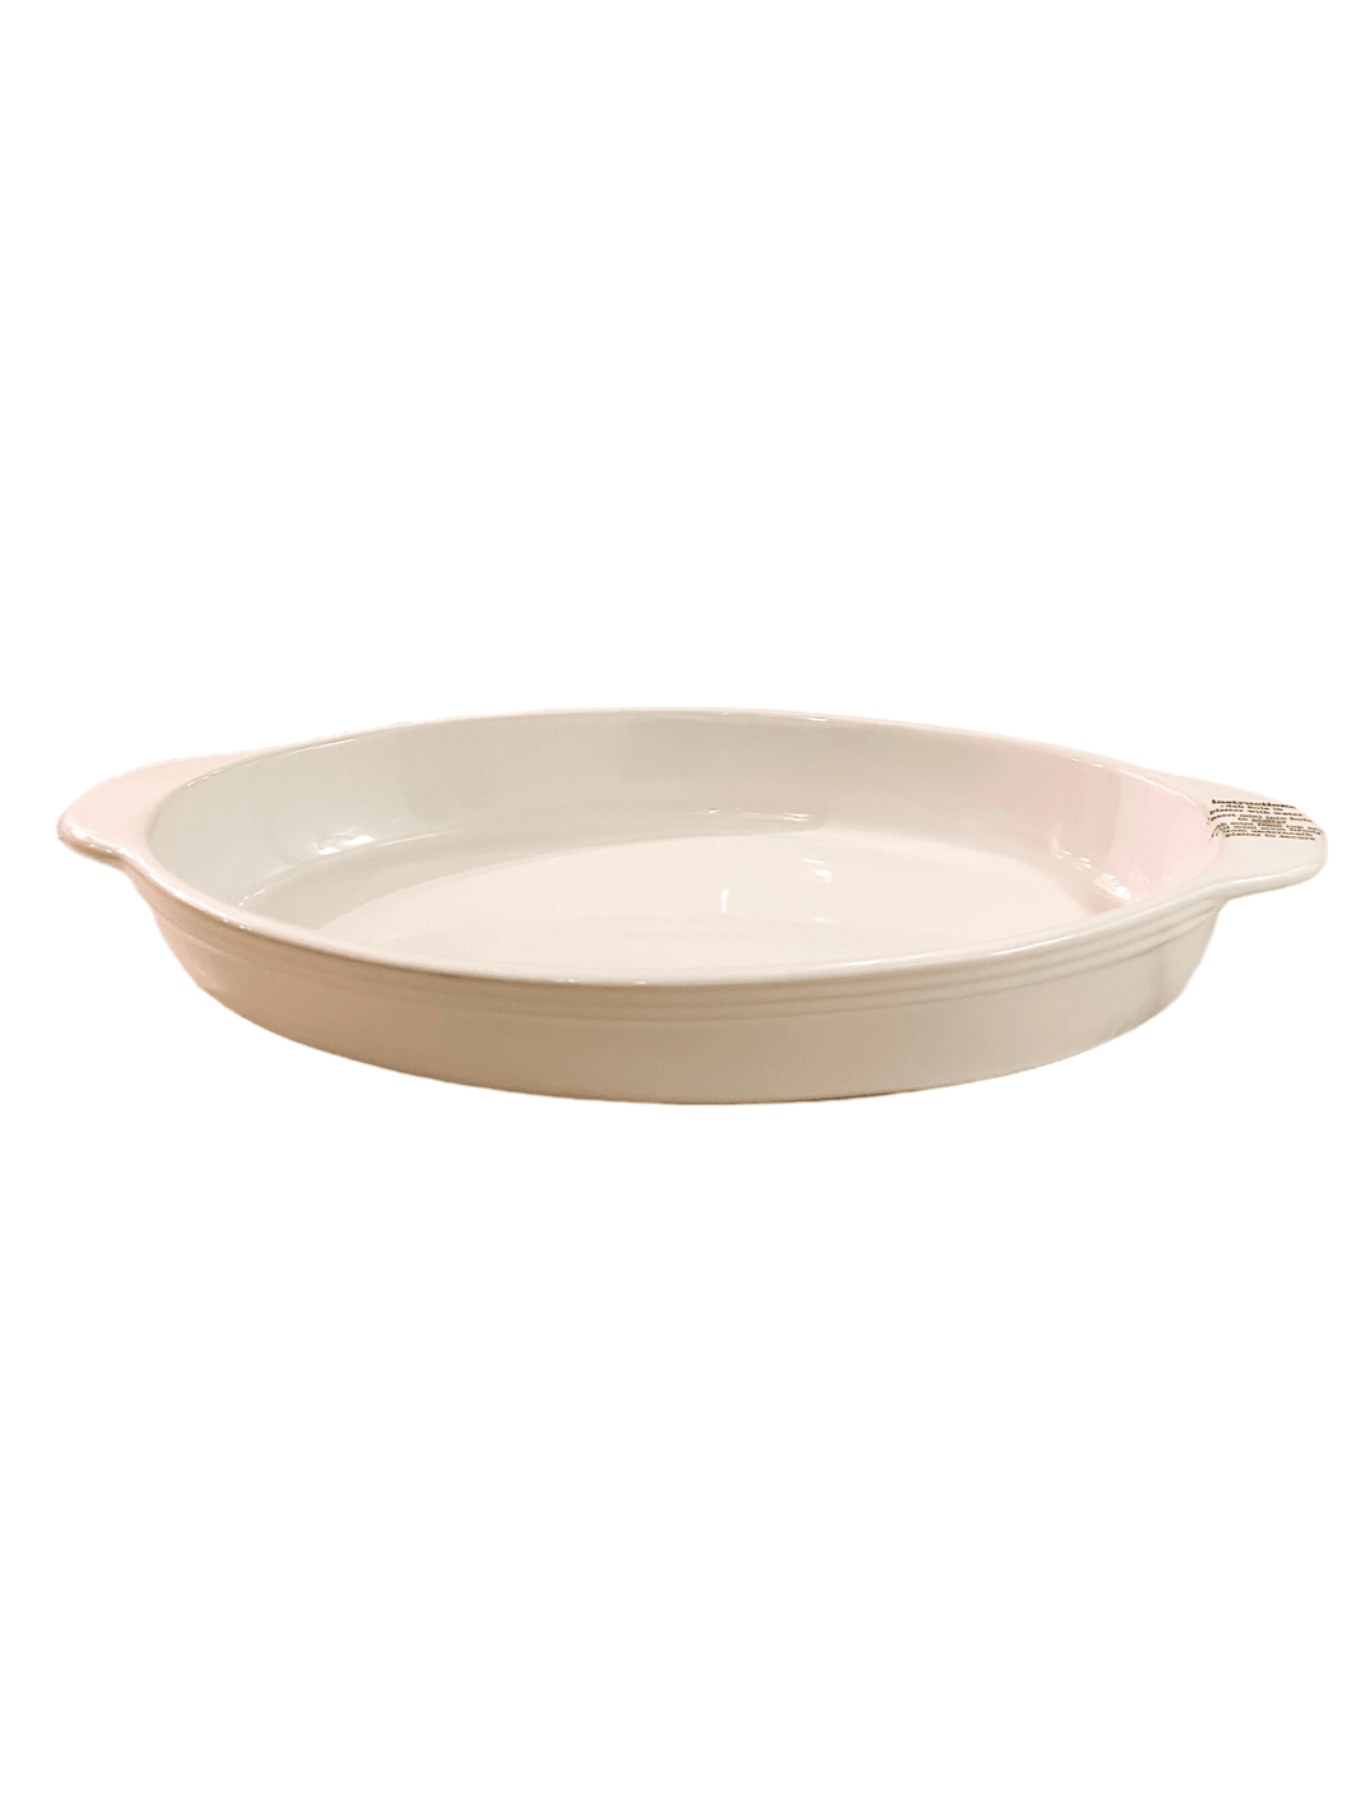 Oval baker in an ivory finish